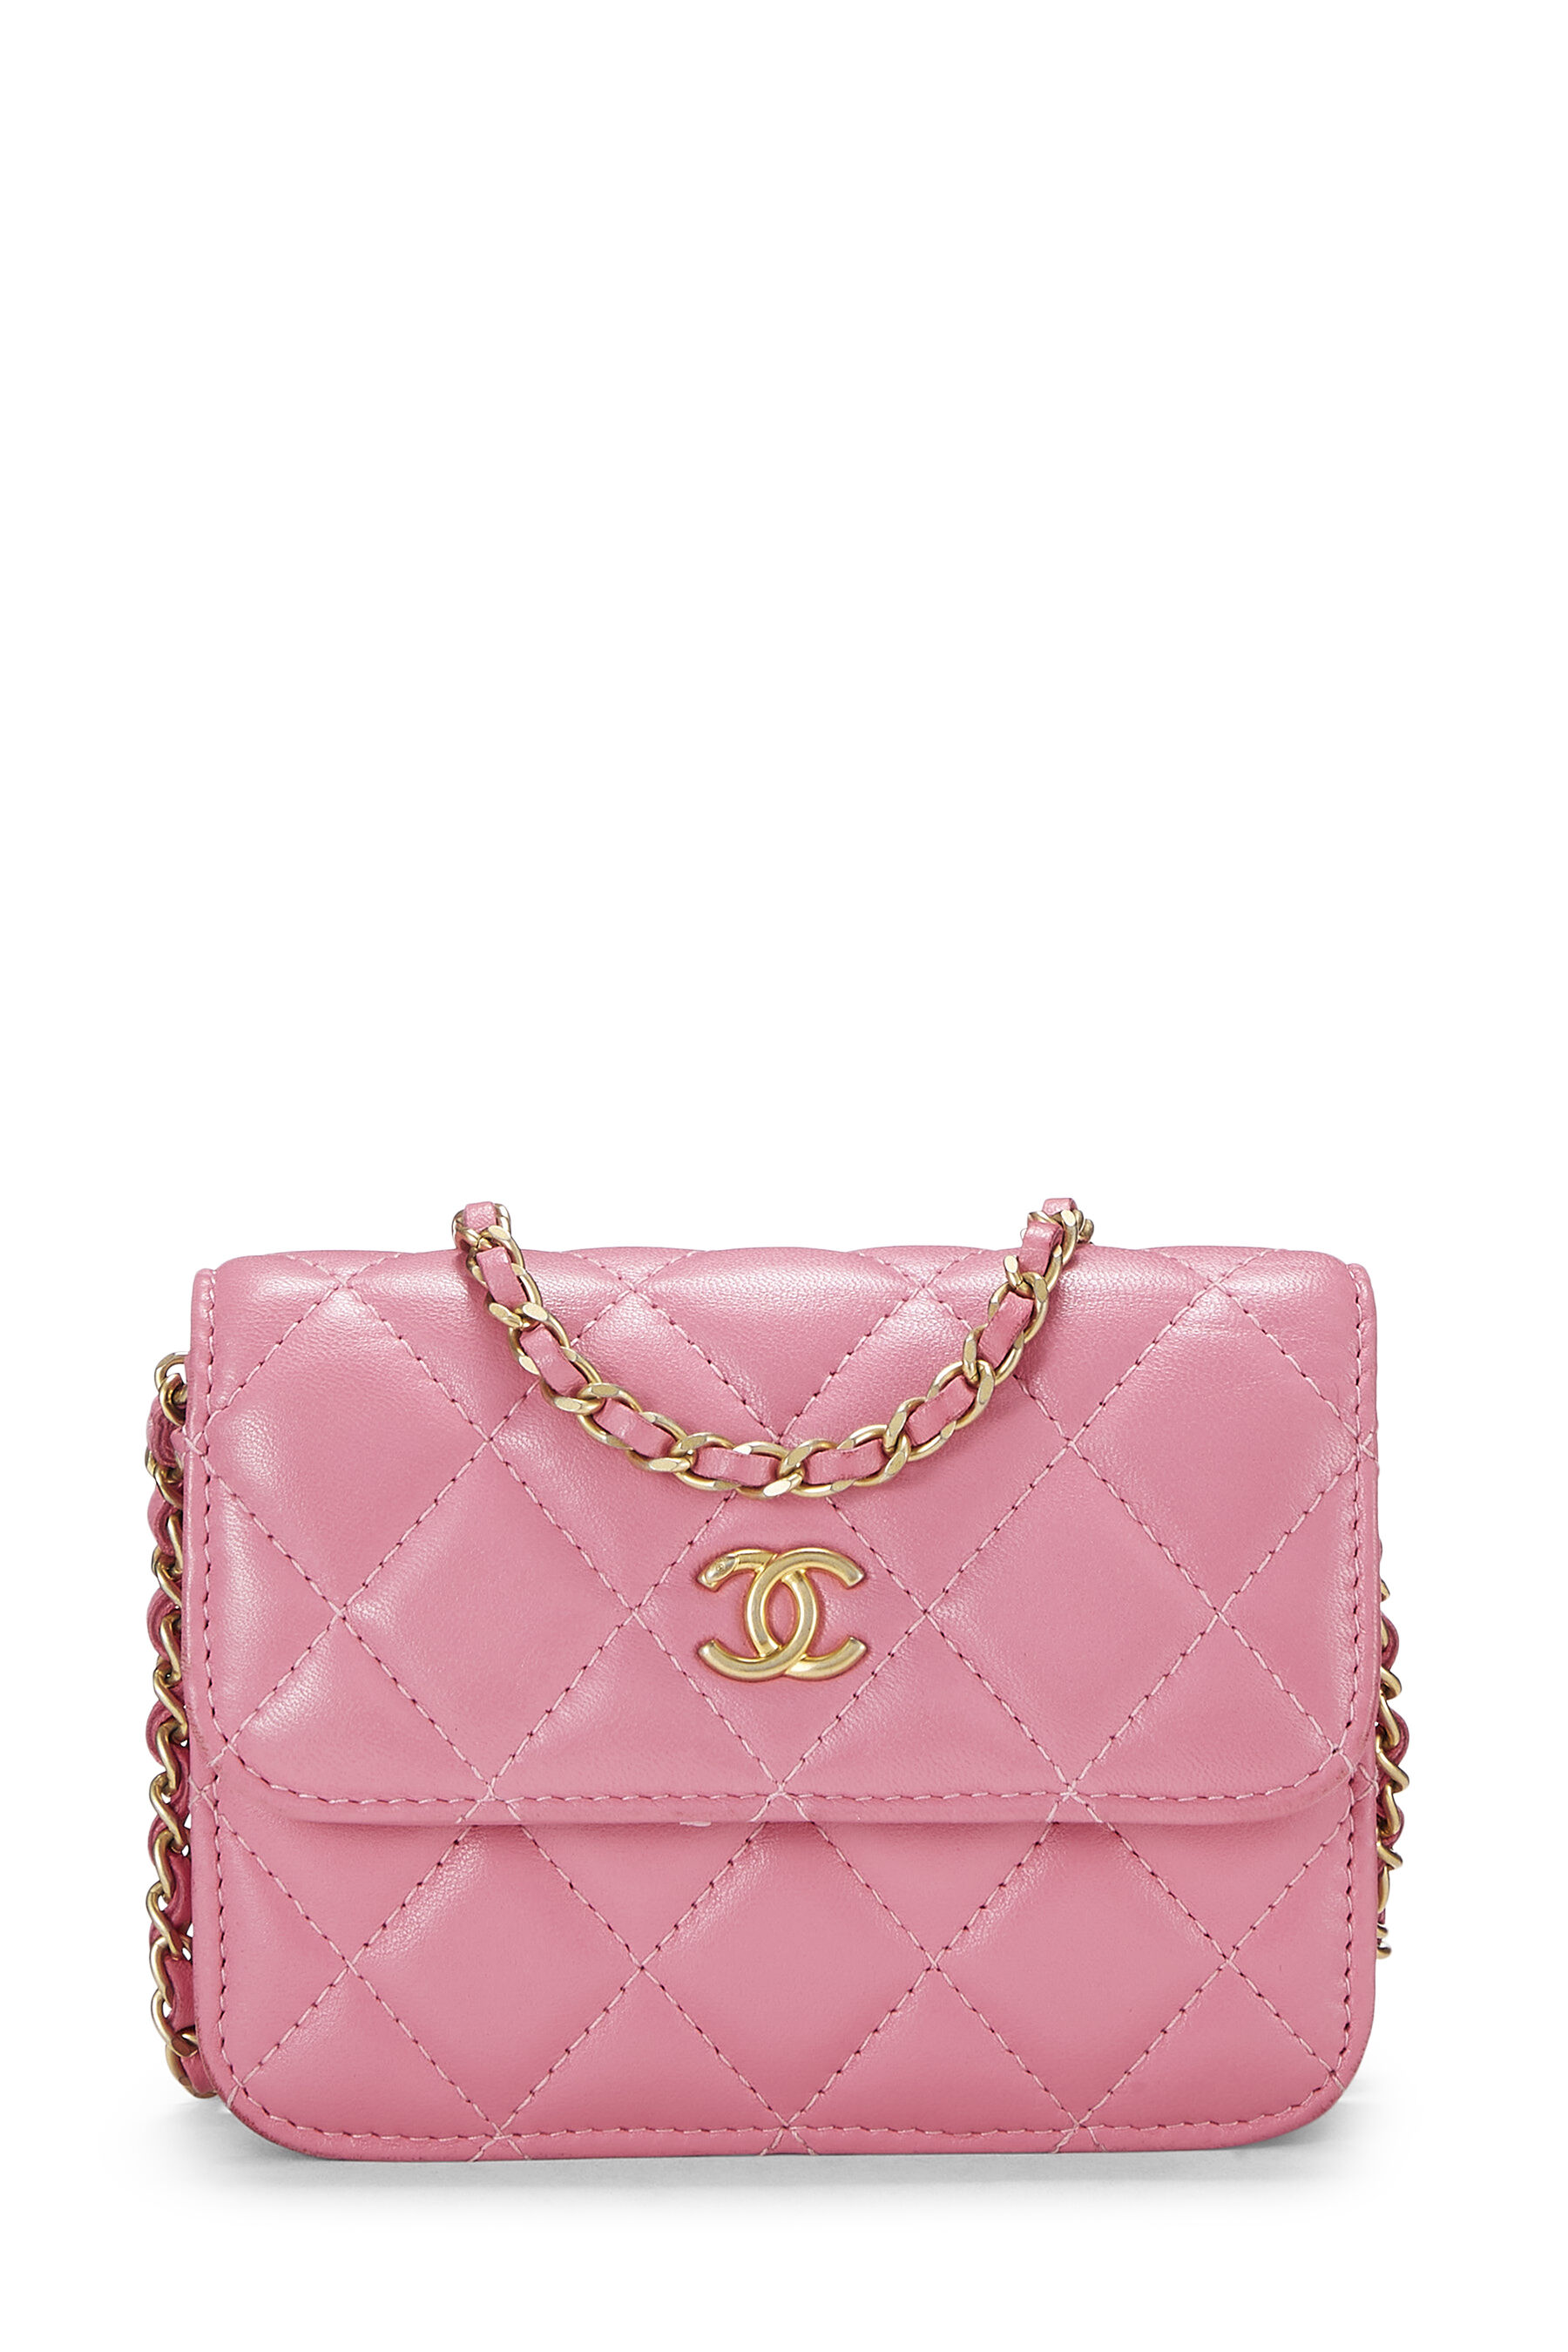 CHANEL Lambskin Quilted Small Top Handle Vanity Case With Chain Dark Pink  1161346